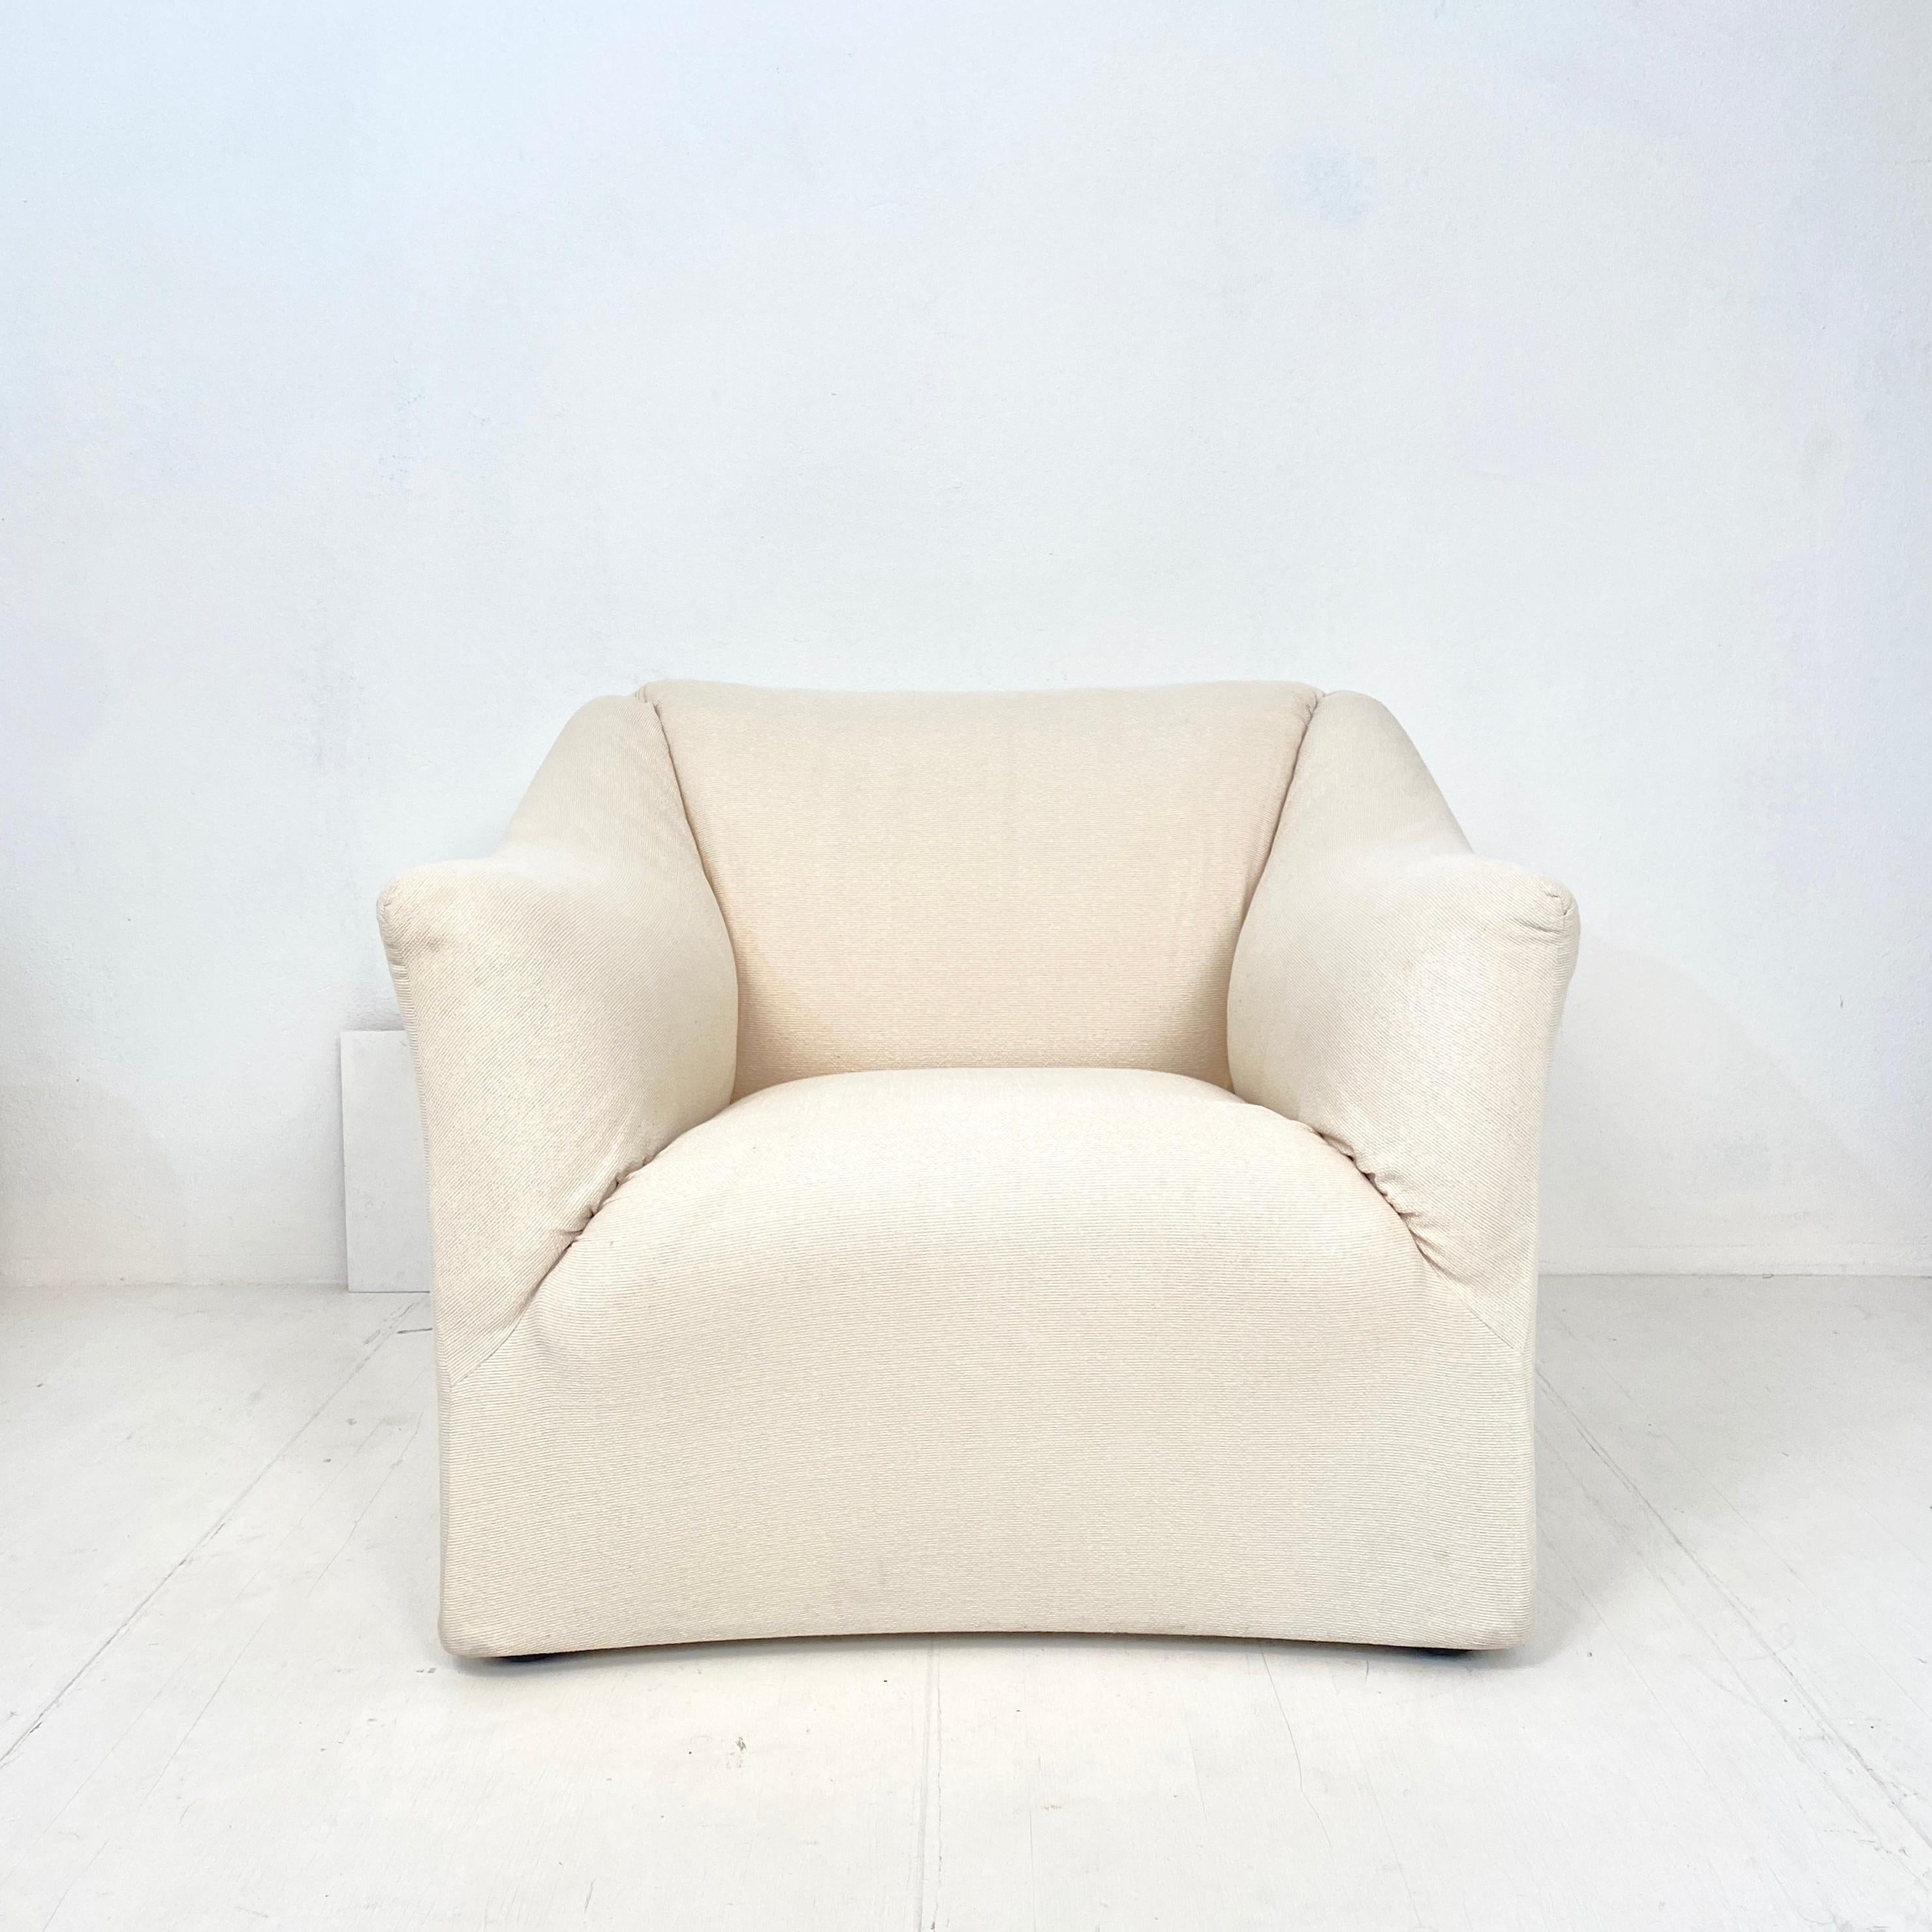 This beautiful club lounge chair by Mario Bellini for Cassina 'Tentazione' model 685 was made in the 1970s.
They have a comfortable and deep seat and are wrapped in white Cotton fabric. It is a classic Bellini design and in its original